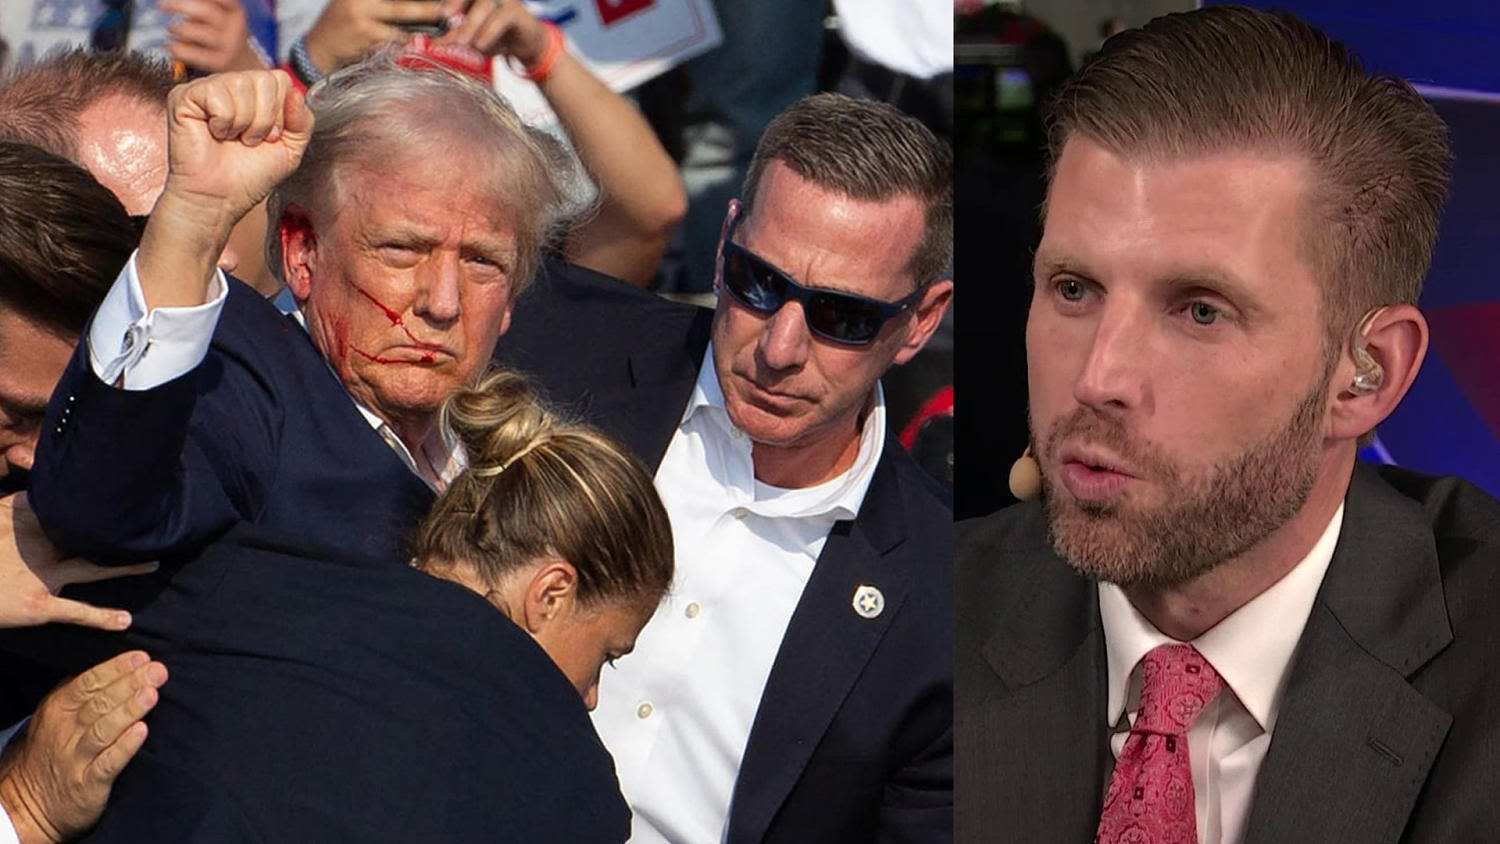 Eric Trump speaks out about assassination attempt: 'This country has real problems'